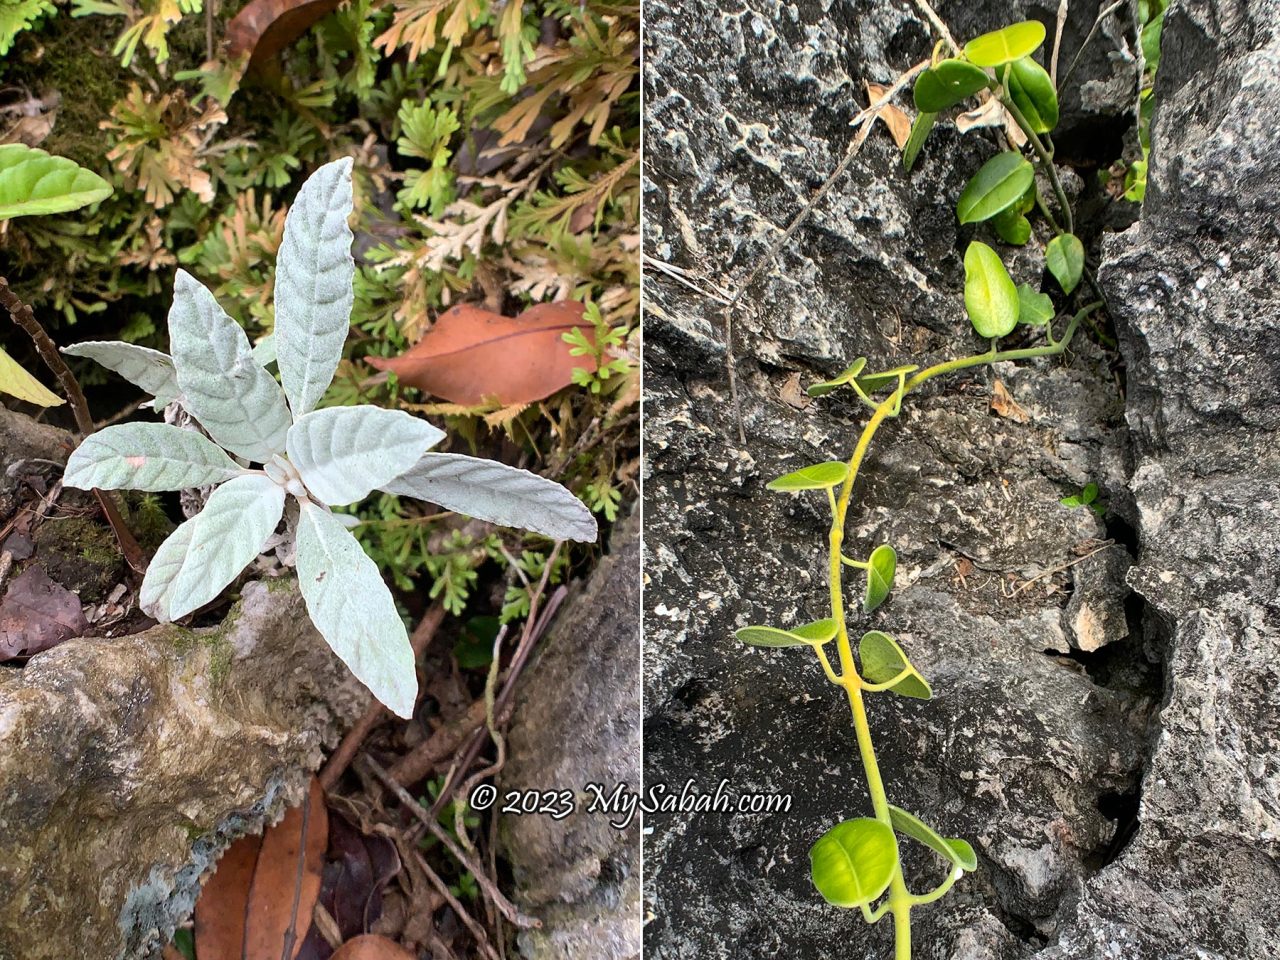 Left: the silvery lucky plant, tawawo. Right: Salung tangi, another magical plant